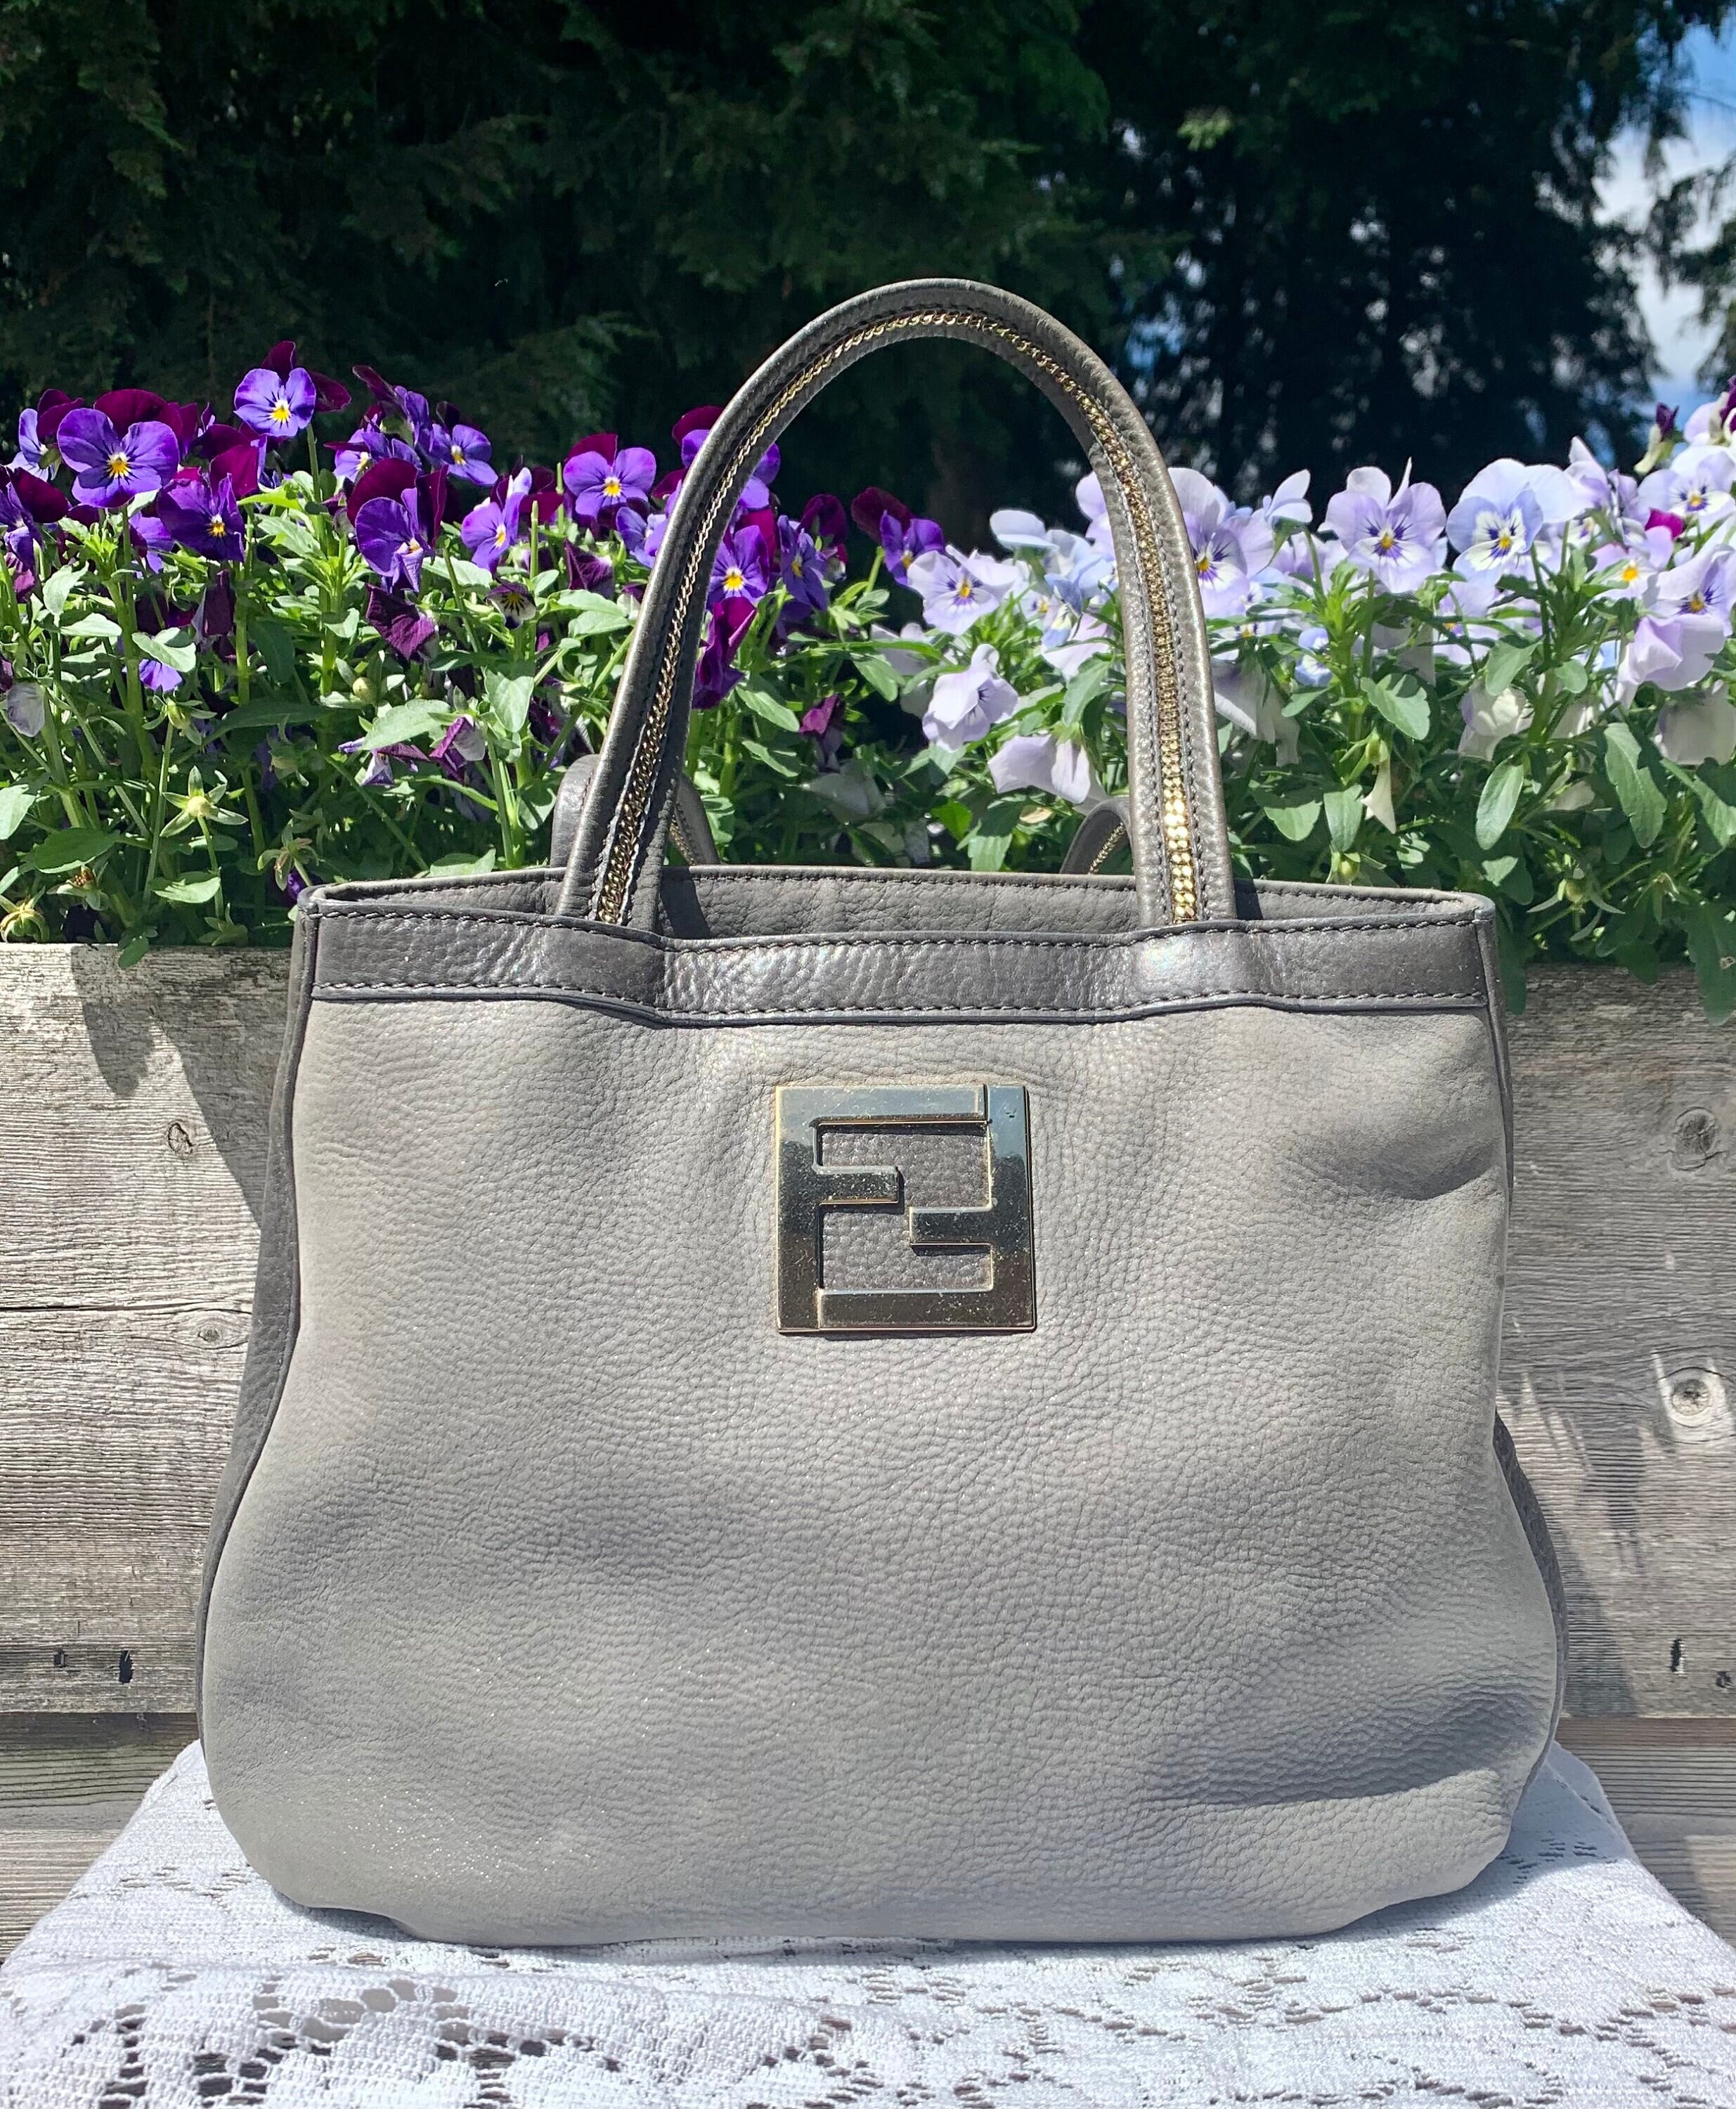 Auth FENDI Zucca Tote Bag PVC Vintage From Japan